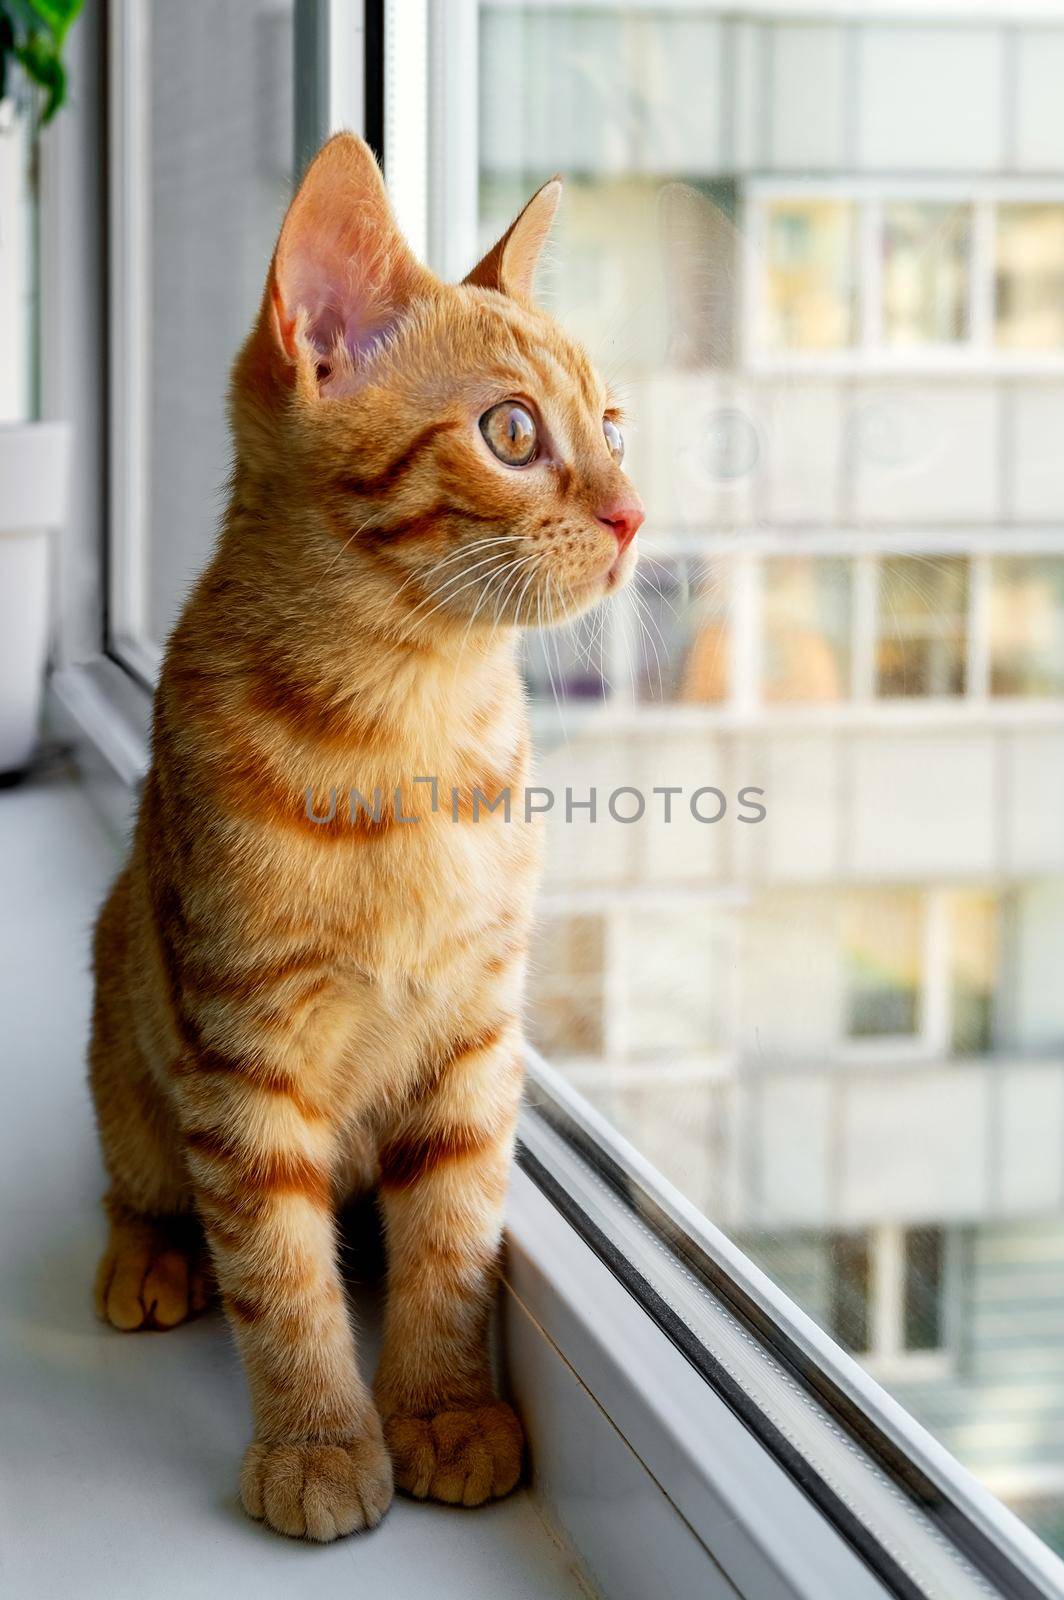 Ginger tabby kitten sitting on the windowsill and looking out by OlgaGubskaya